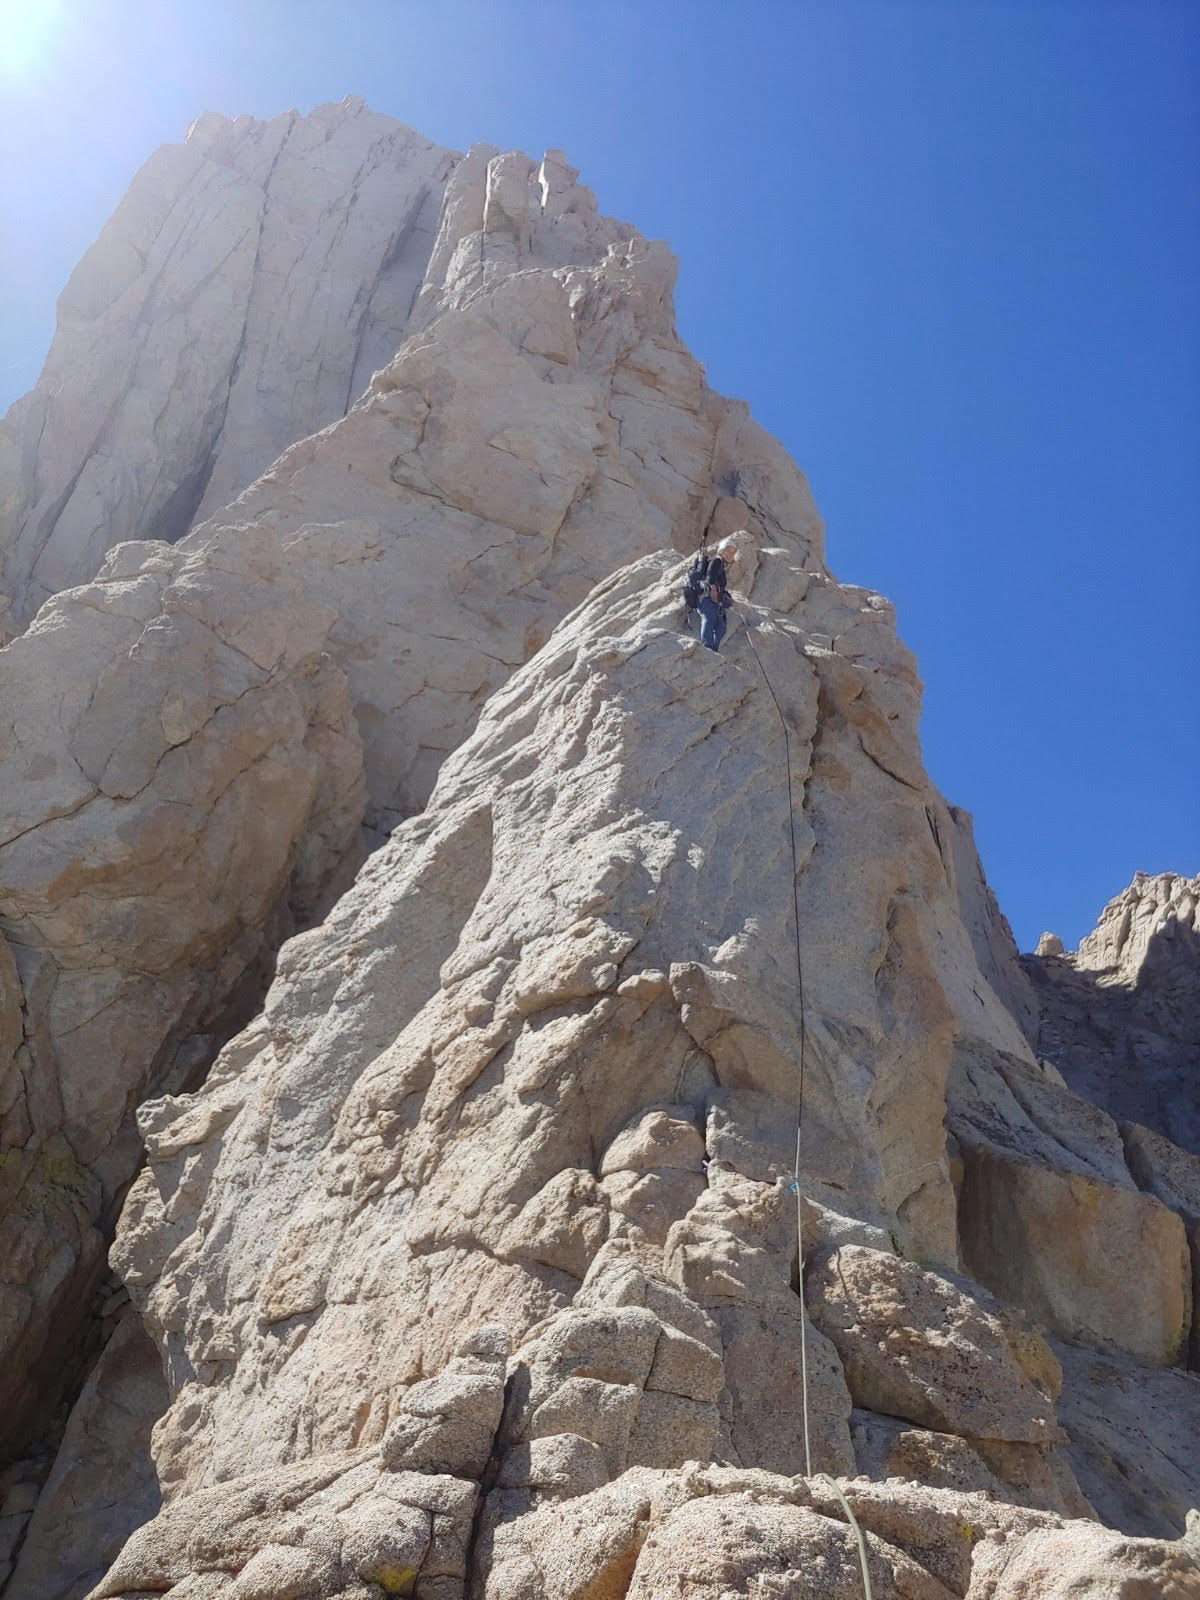 A photo of me after sending the crux pitch on the East Buttress of Mount Whitney